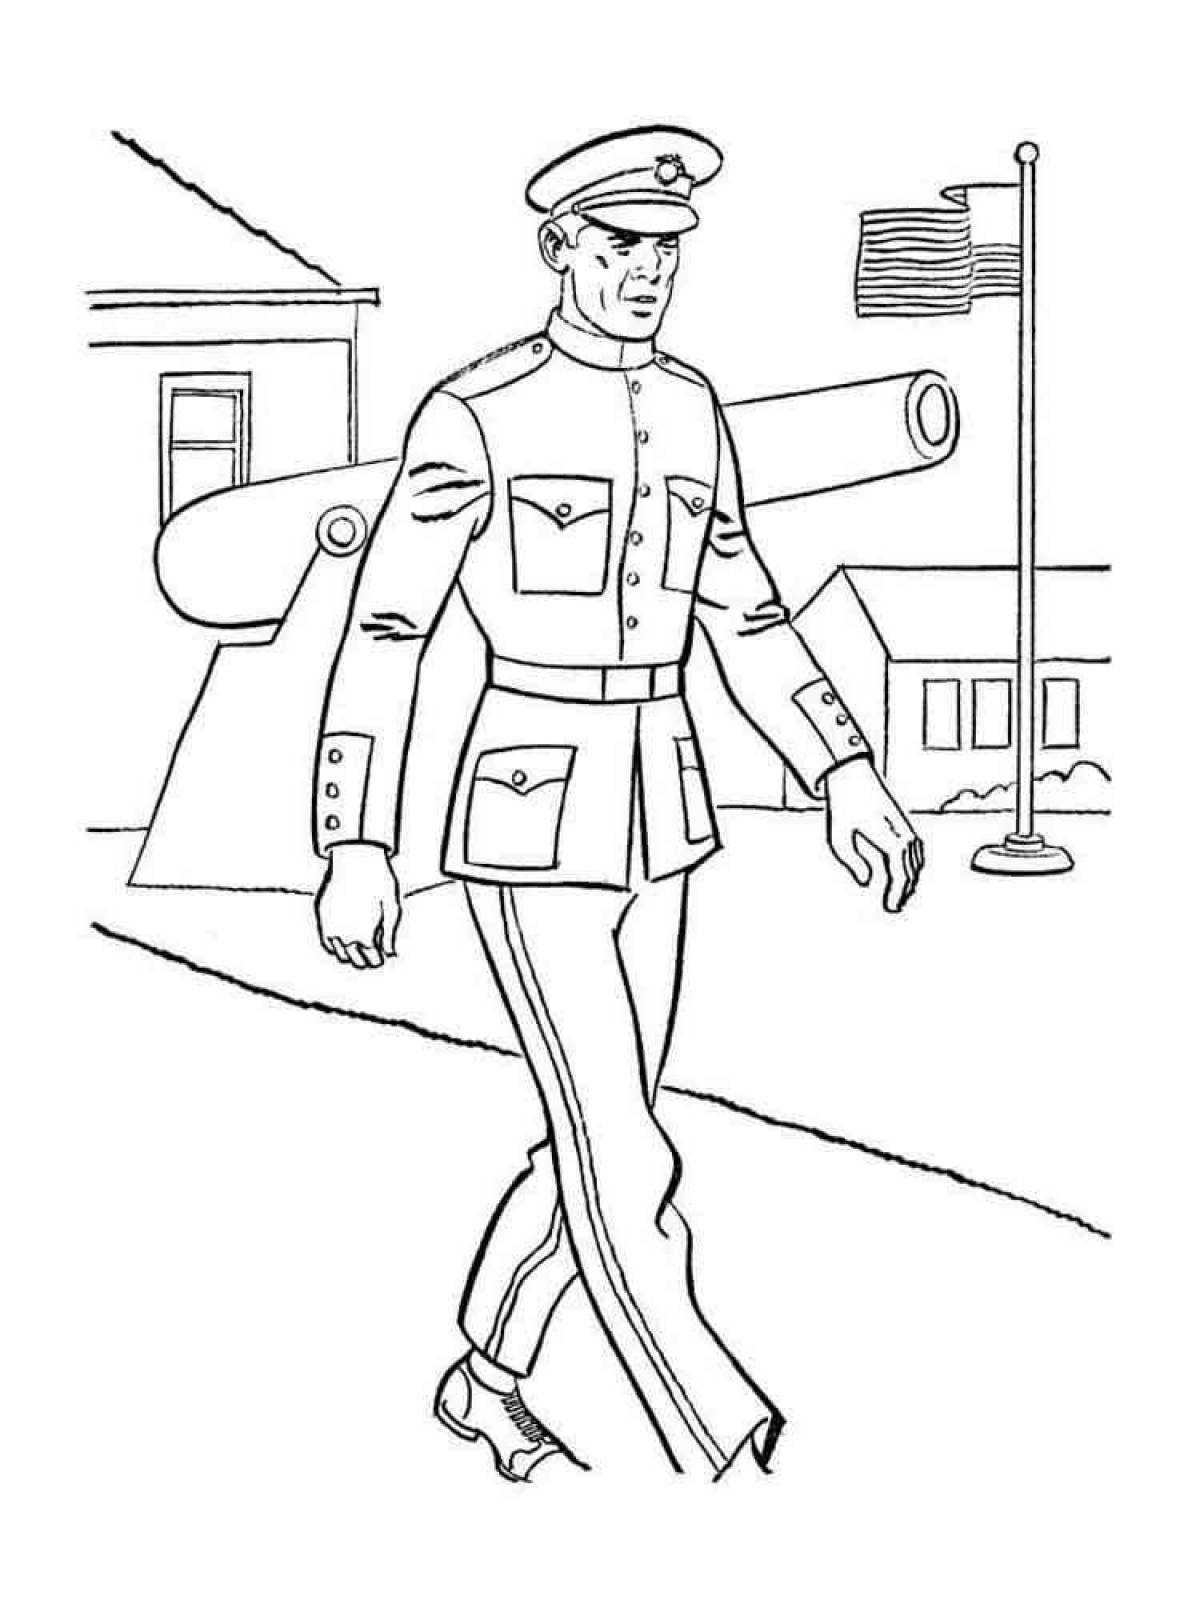 Fantastic soldier coloring book for kids